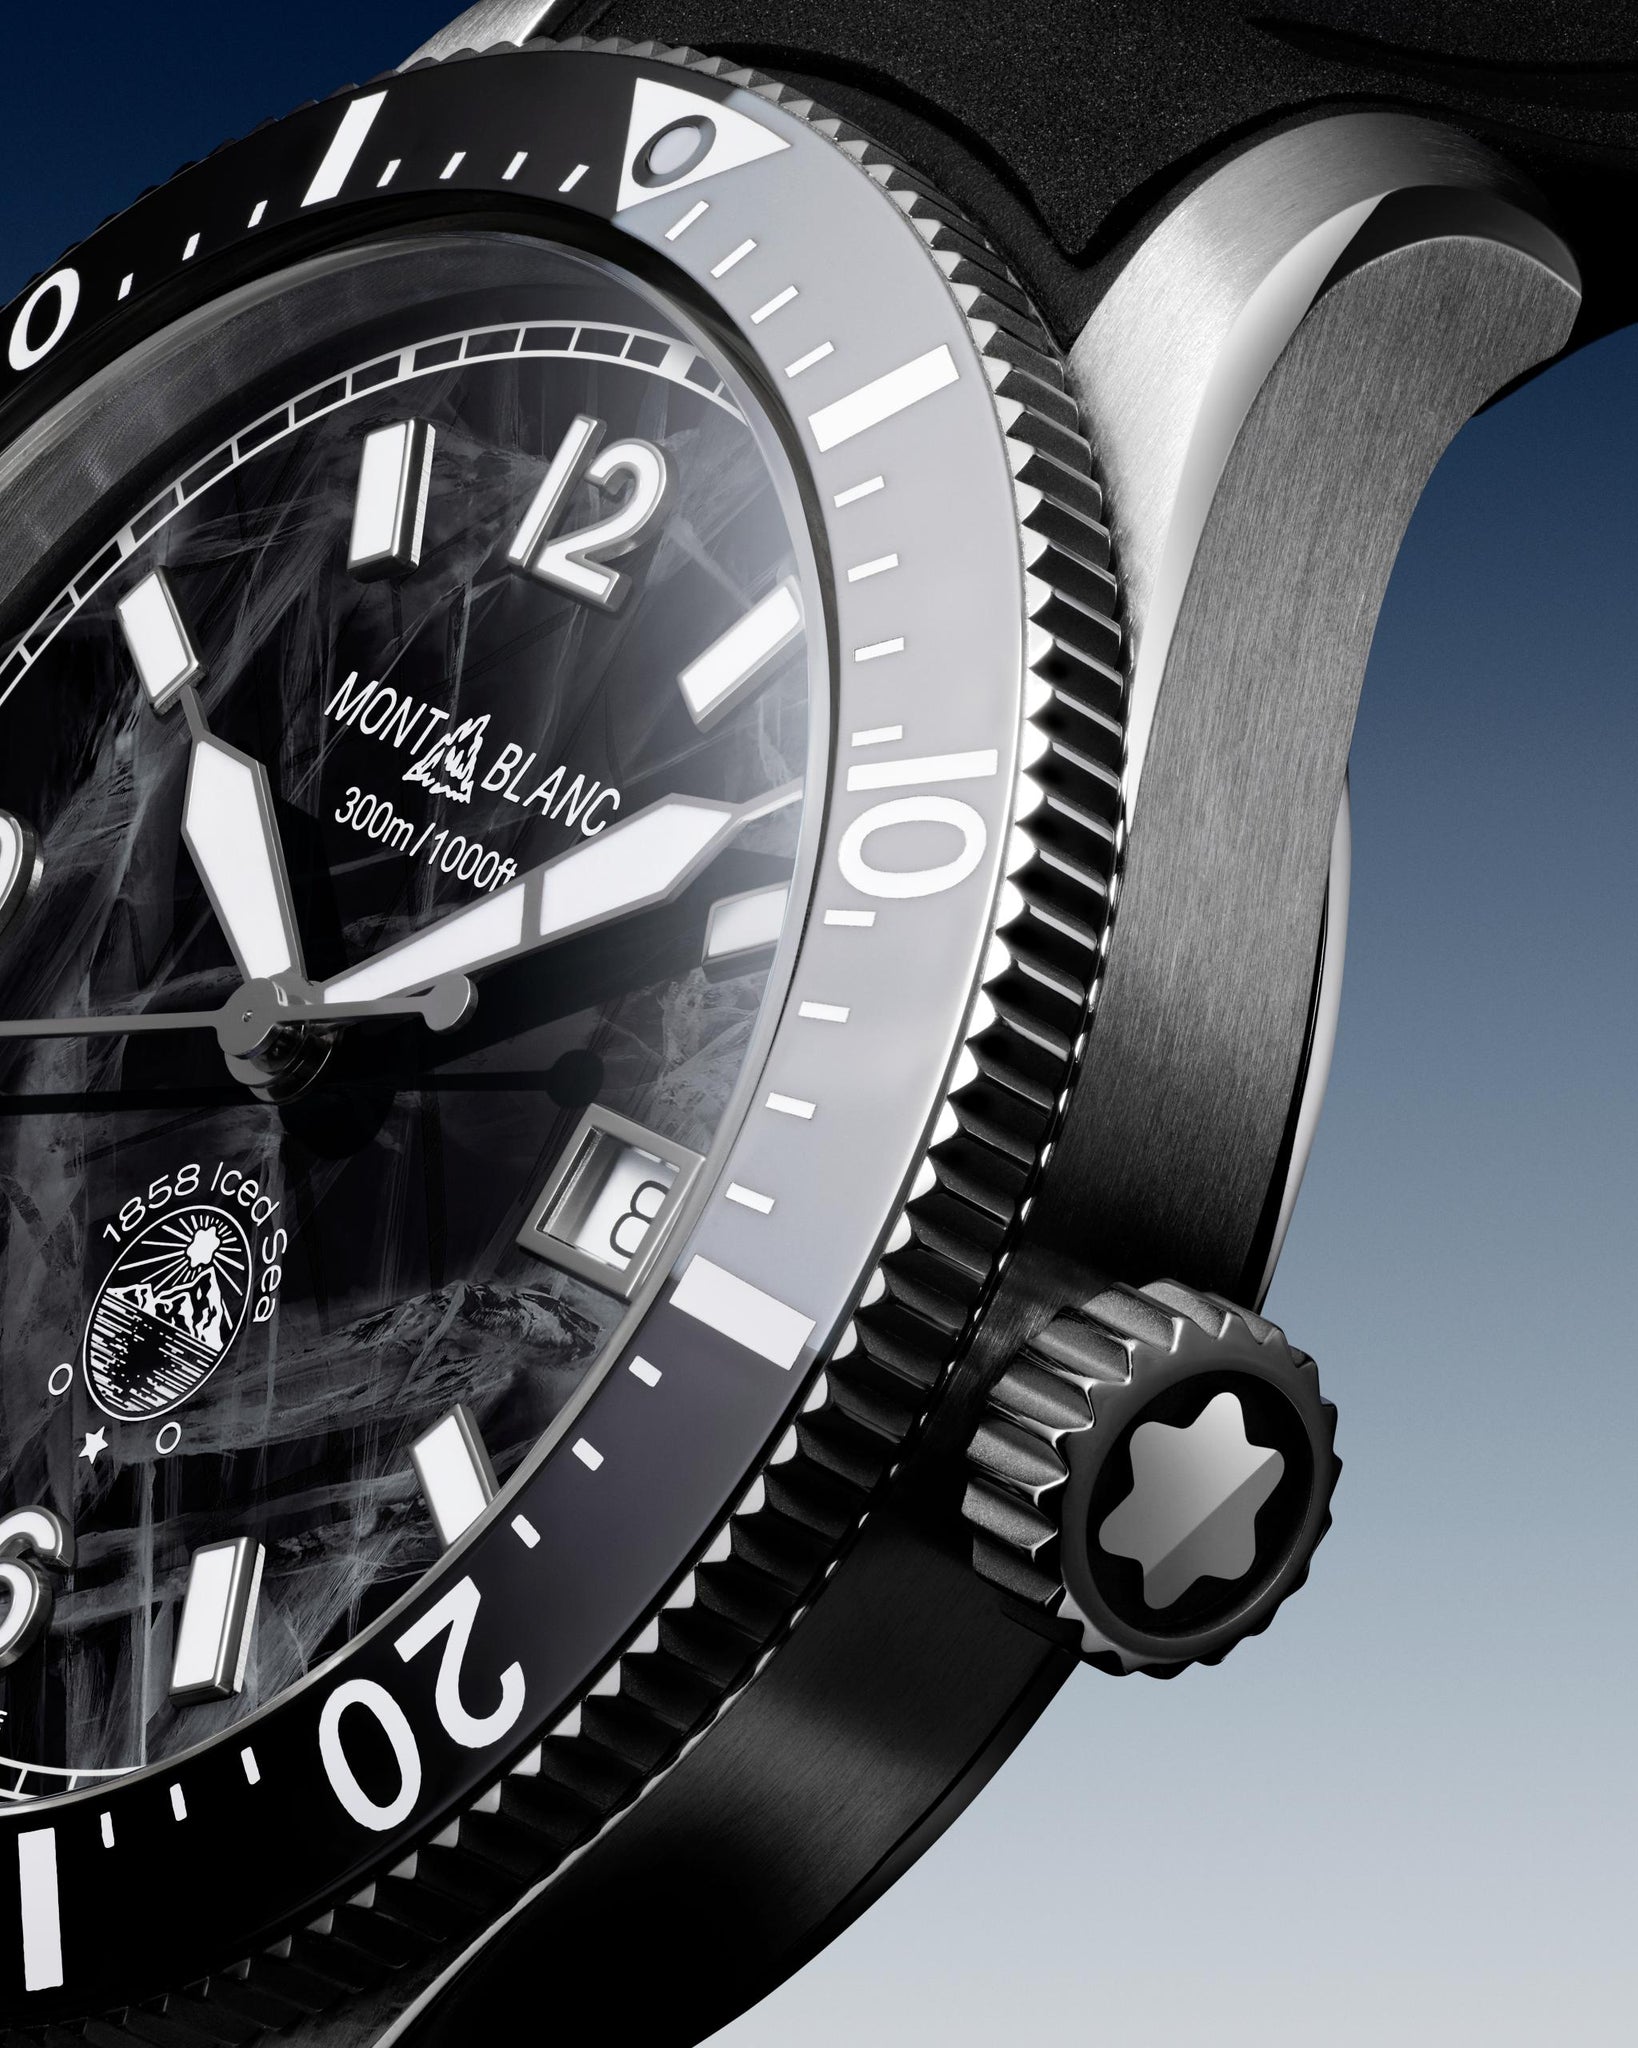 Montblanc 1858 Iced Sea Automatic Date (Cadran noir / 41mm)